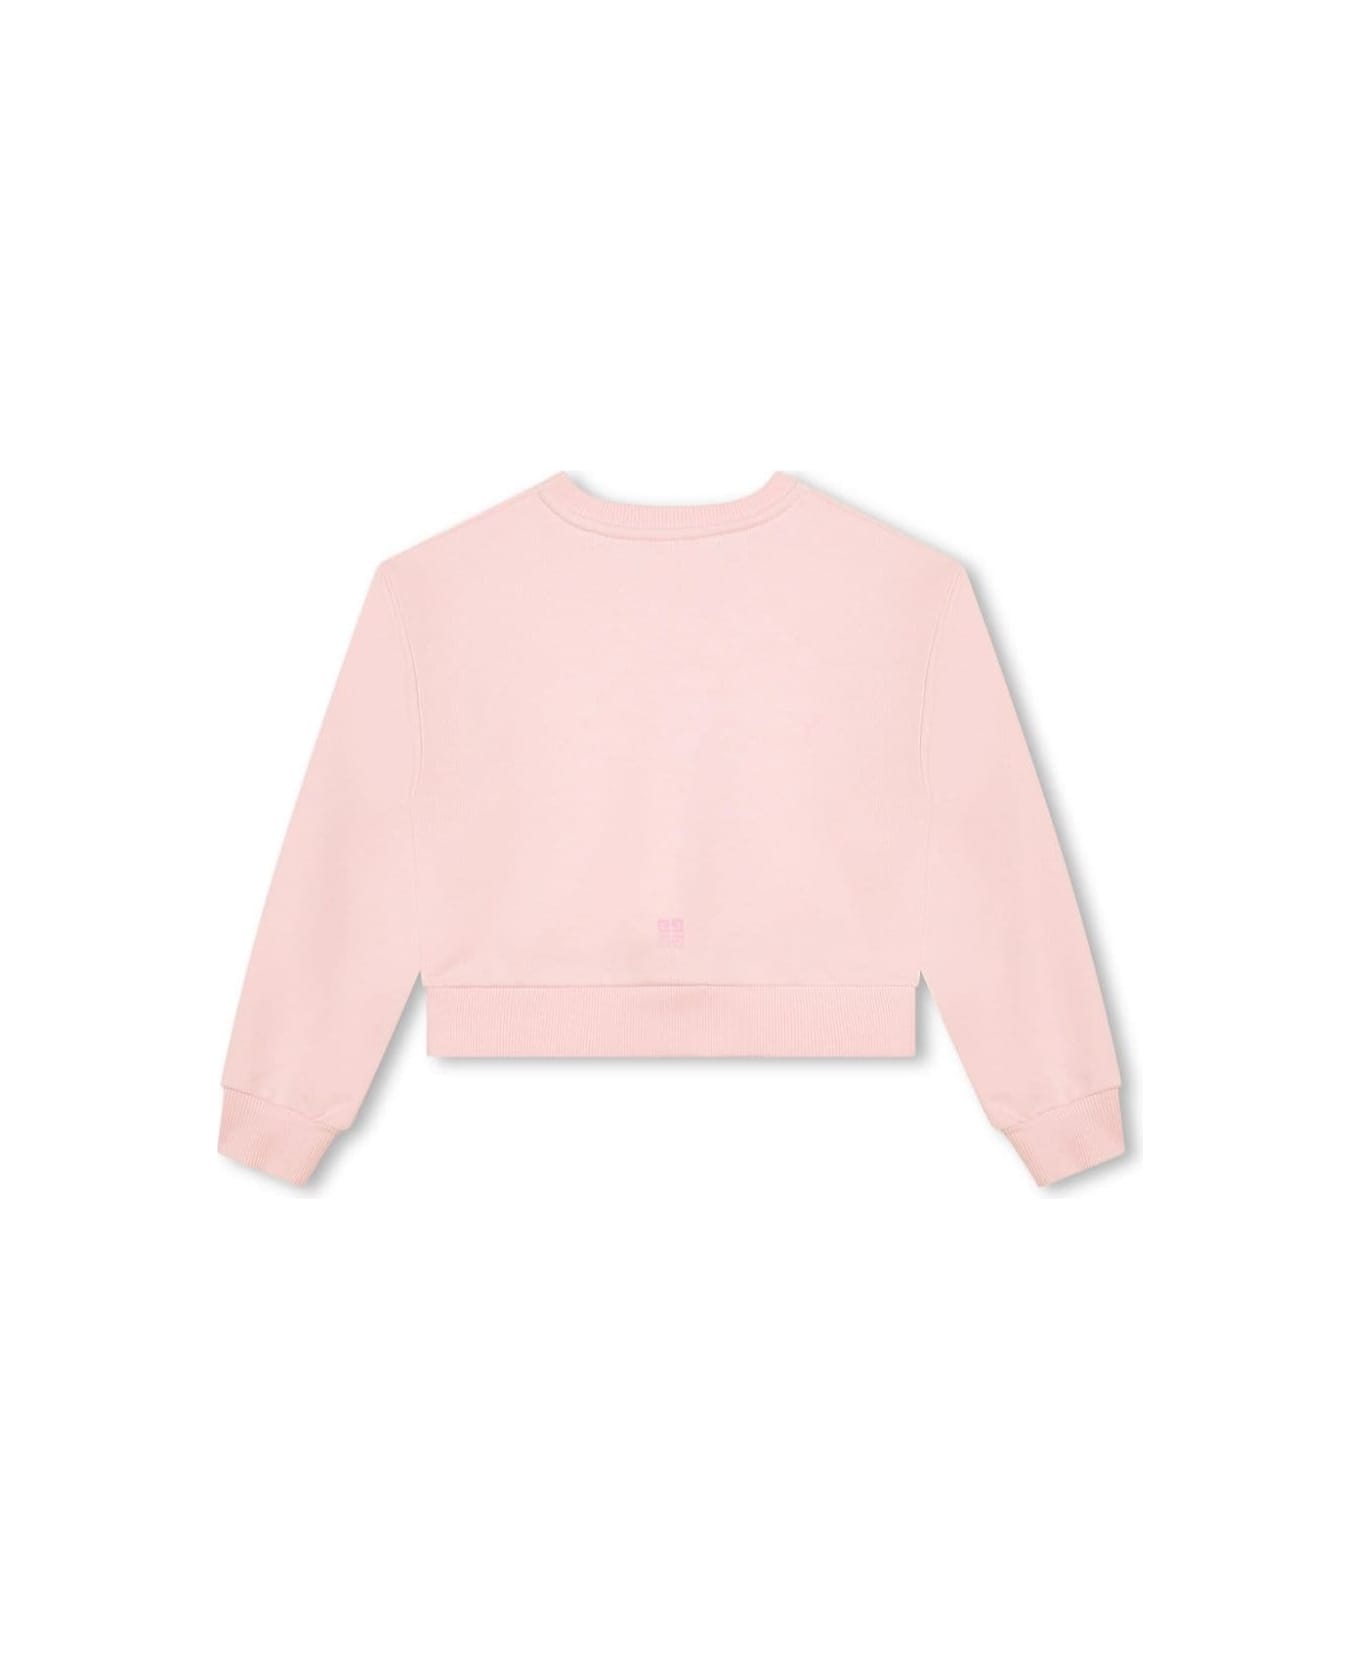 Givenchy Pink Crewneck Sweatshirt With Logo Lettering Embroidery In Cotton Blend Girl - Pink